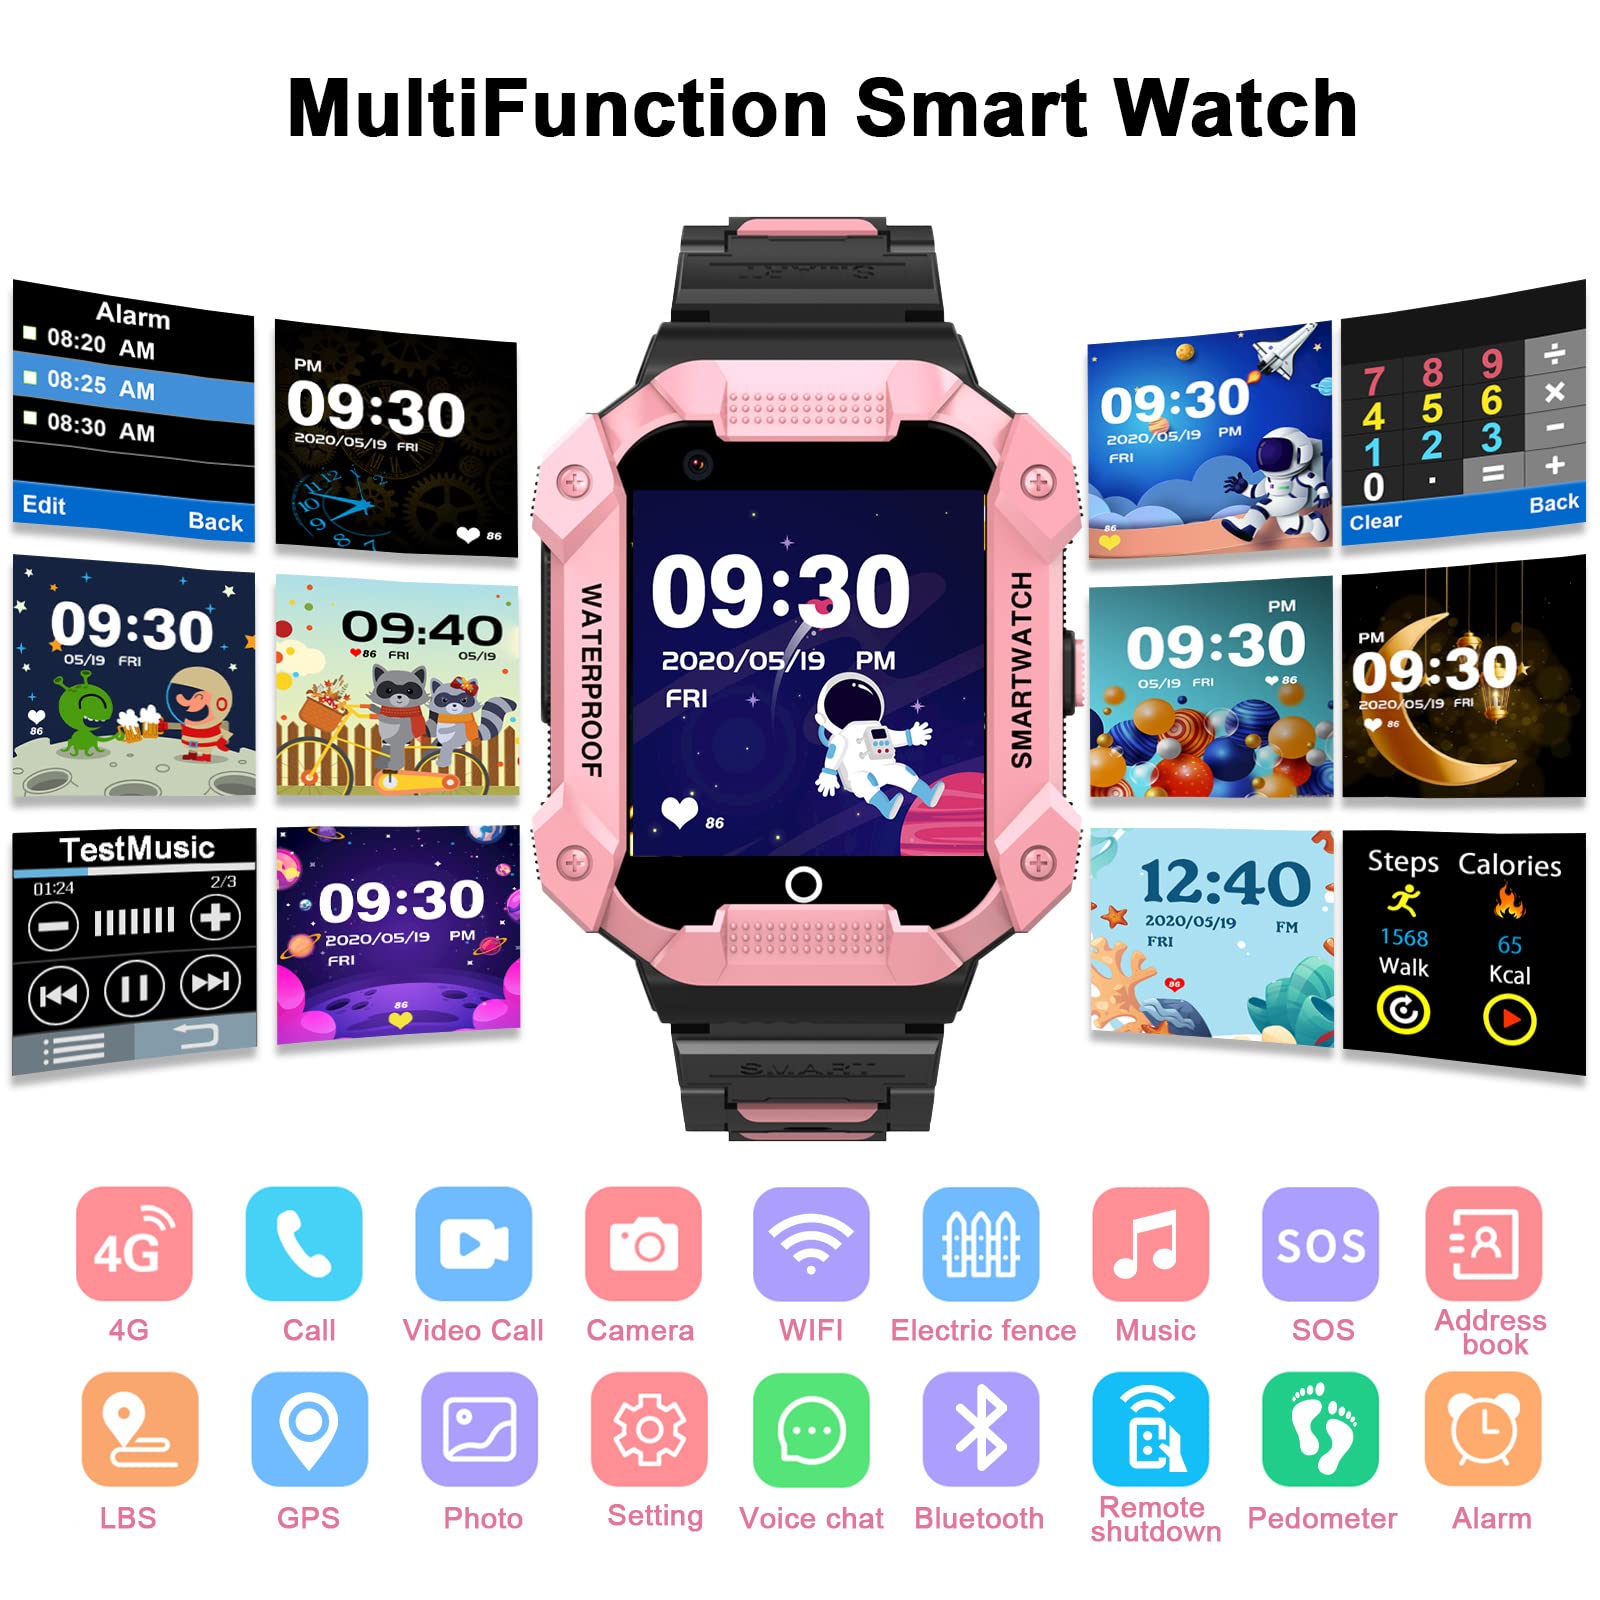 PTHTECHUS 4G Smart Watch for Kids - Smartwatch Phone with GPS Tracker,HD Camera, SOS, WiFi, Pedometer, Audio and Video Calling Voice Chat MP3 Waterproof Compatible Android and iOS for Girls Boys Gifts